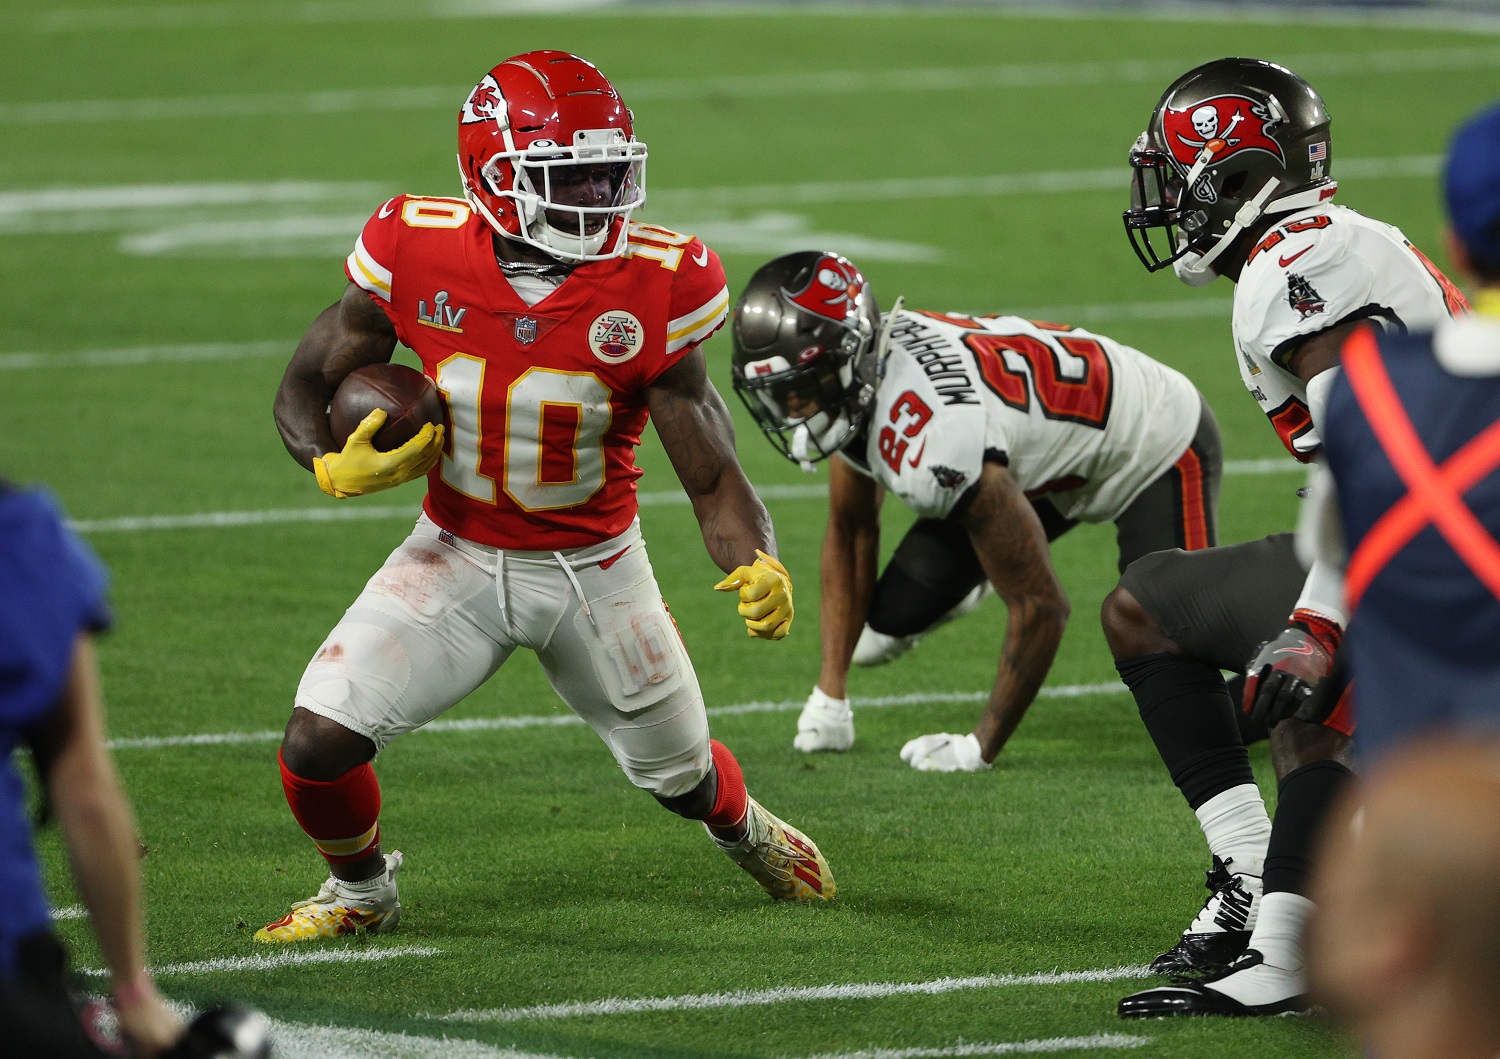 Tyreek Hill of the Kansas City Chiefs scrambles ahead of Sean Murphy-Bunting of the Tampa Bay Buccaneers in Super Bowl 55. | Patrick Smith/Getty Images